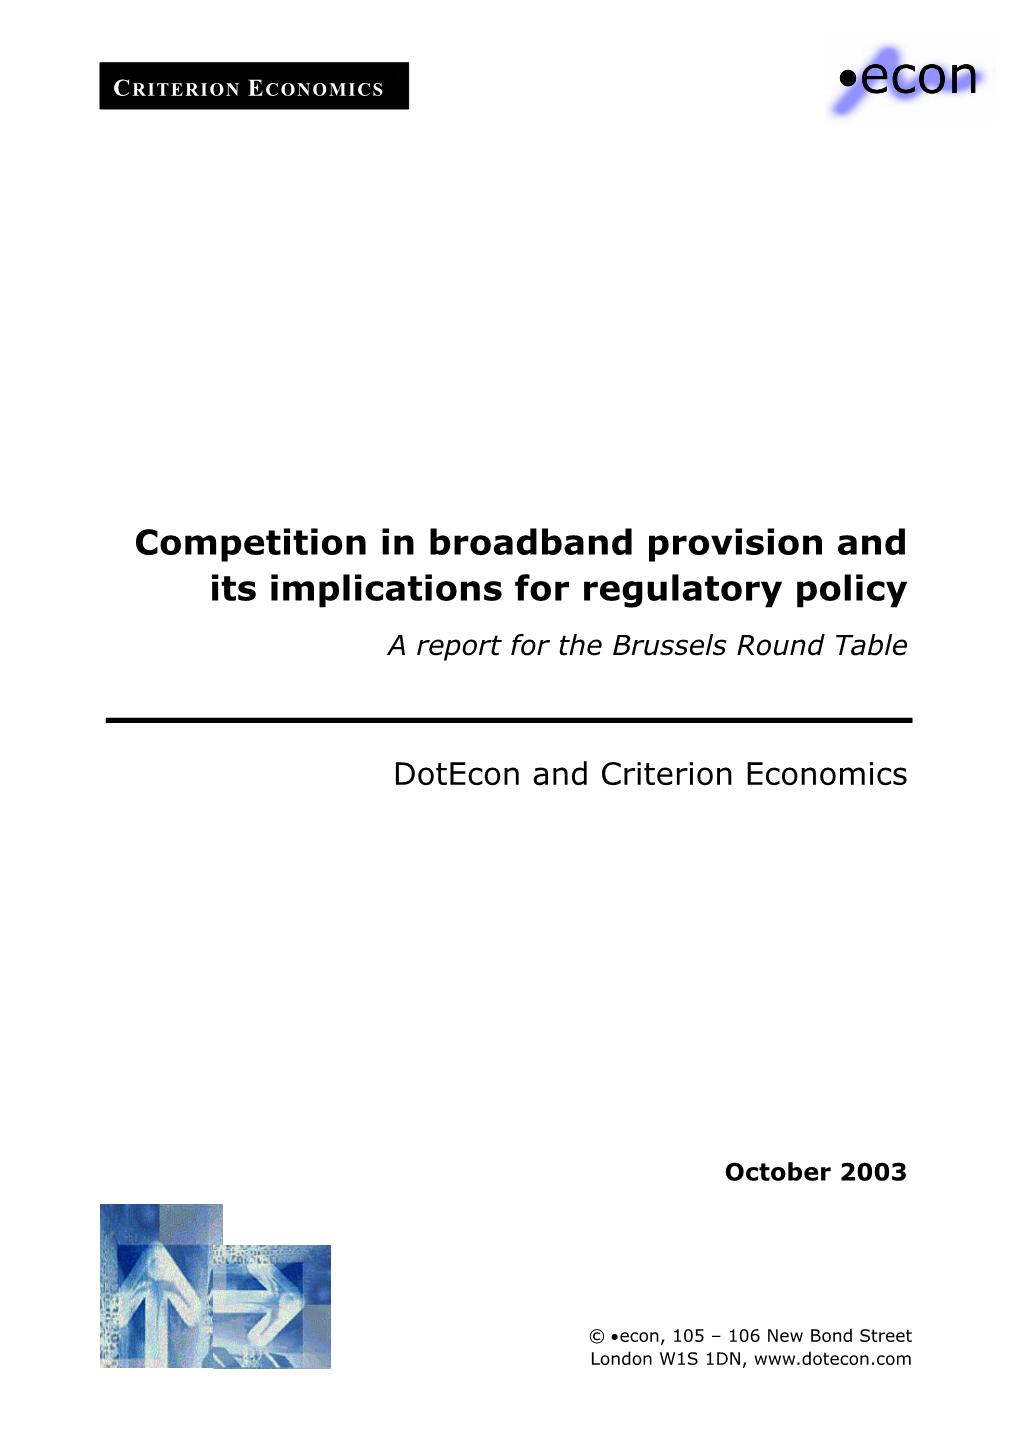 Competition in Broadband Provision and Its Implications for Regulatory Policy a Report for the Brussels Round Table